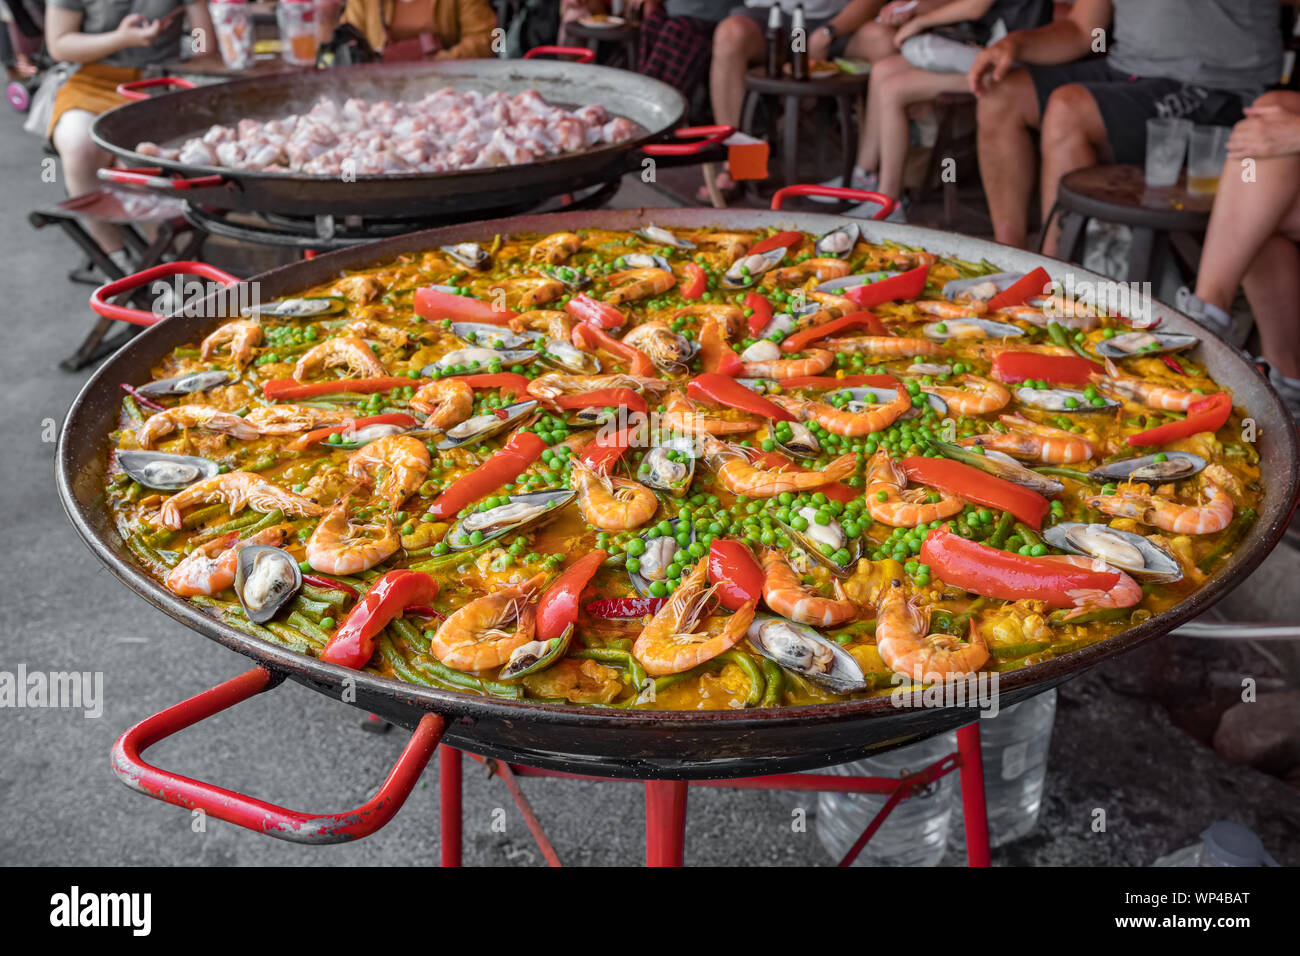 Big wok pan of spanish seafood paella with mussels, shrimps and vegetables  Stock Photo - Alamy